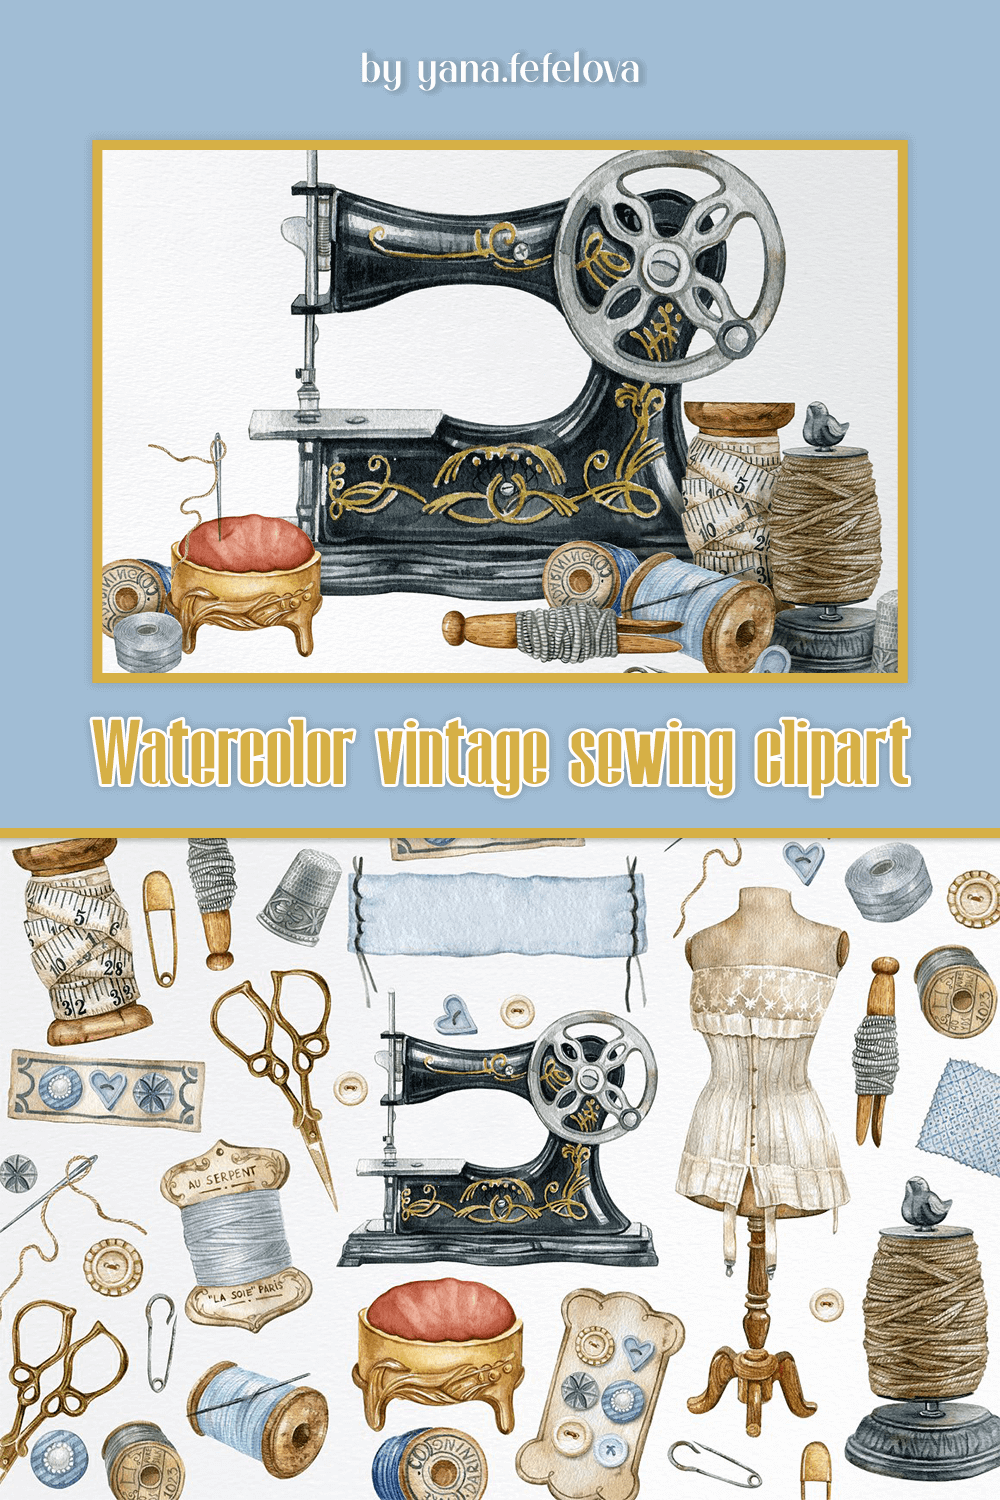 Watercolor drawings of items for needlework on a white and blue background.